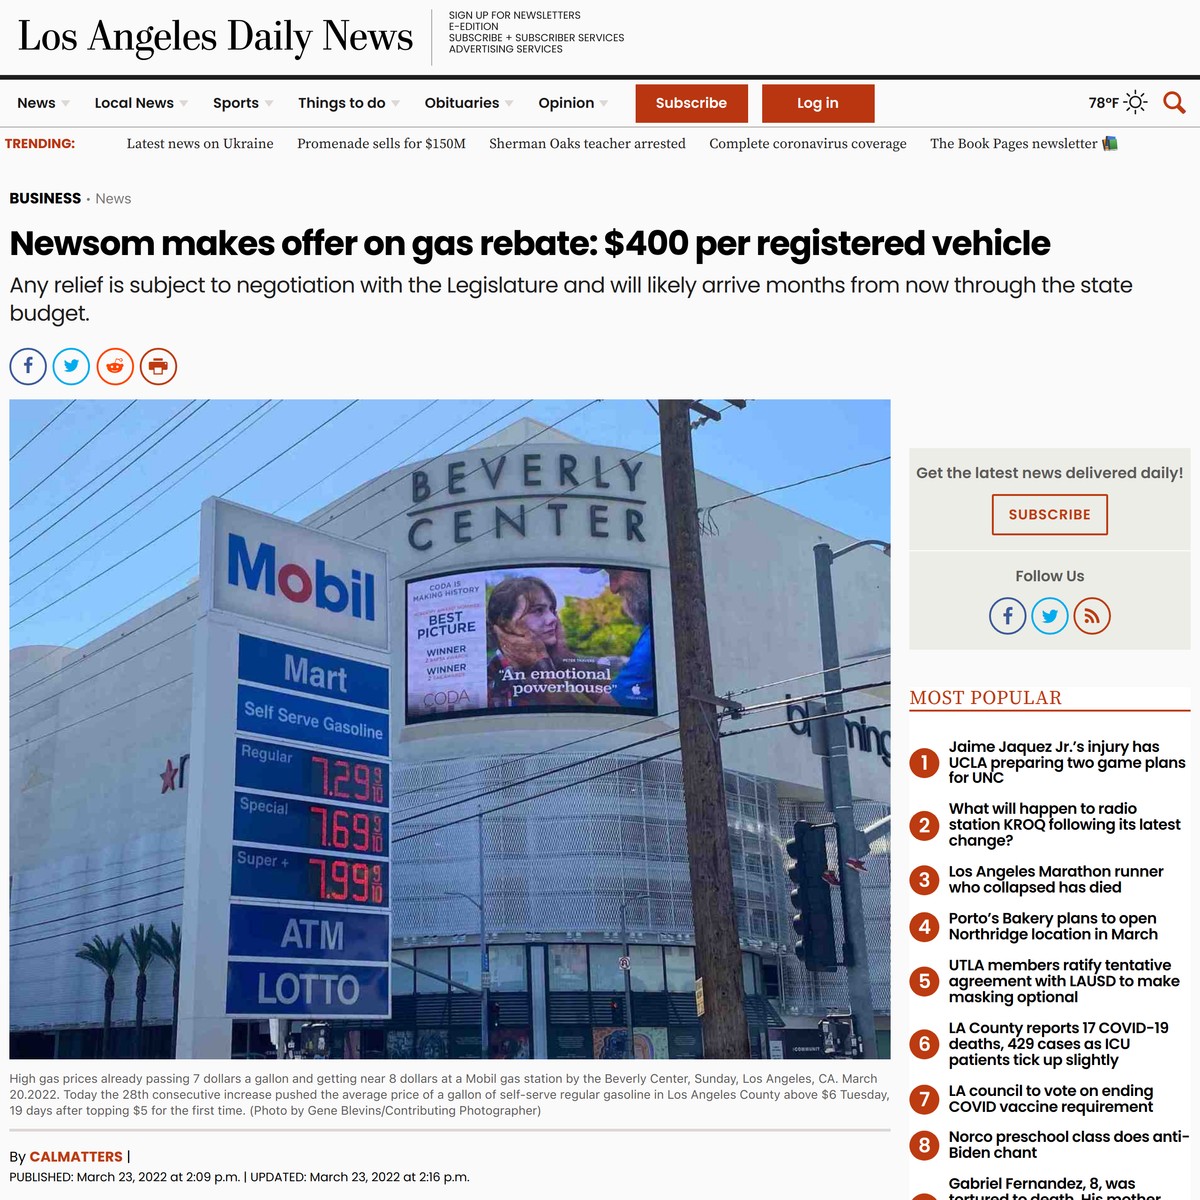 newsom-makes-offer-on-gas-rebate-400-per-registered-vehicle-are-na